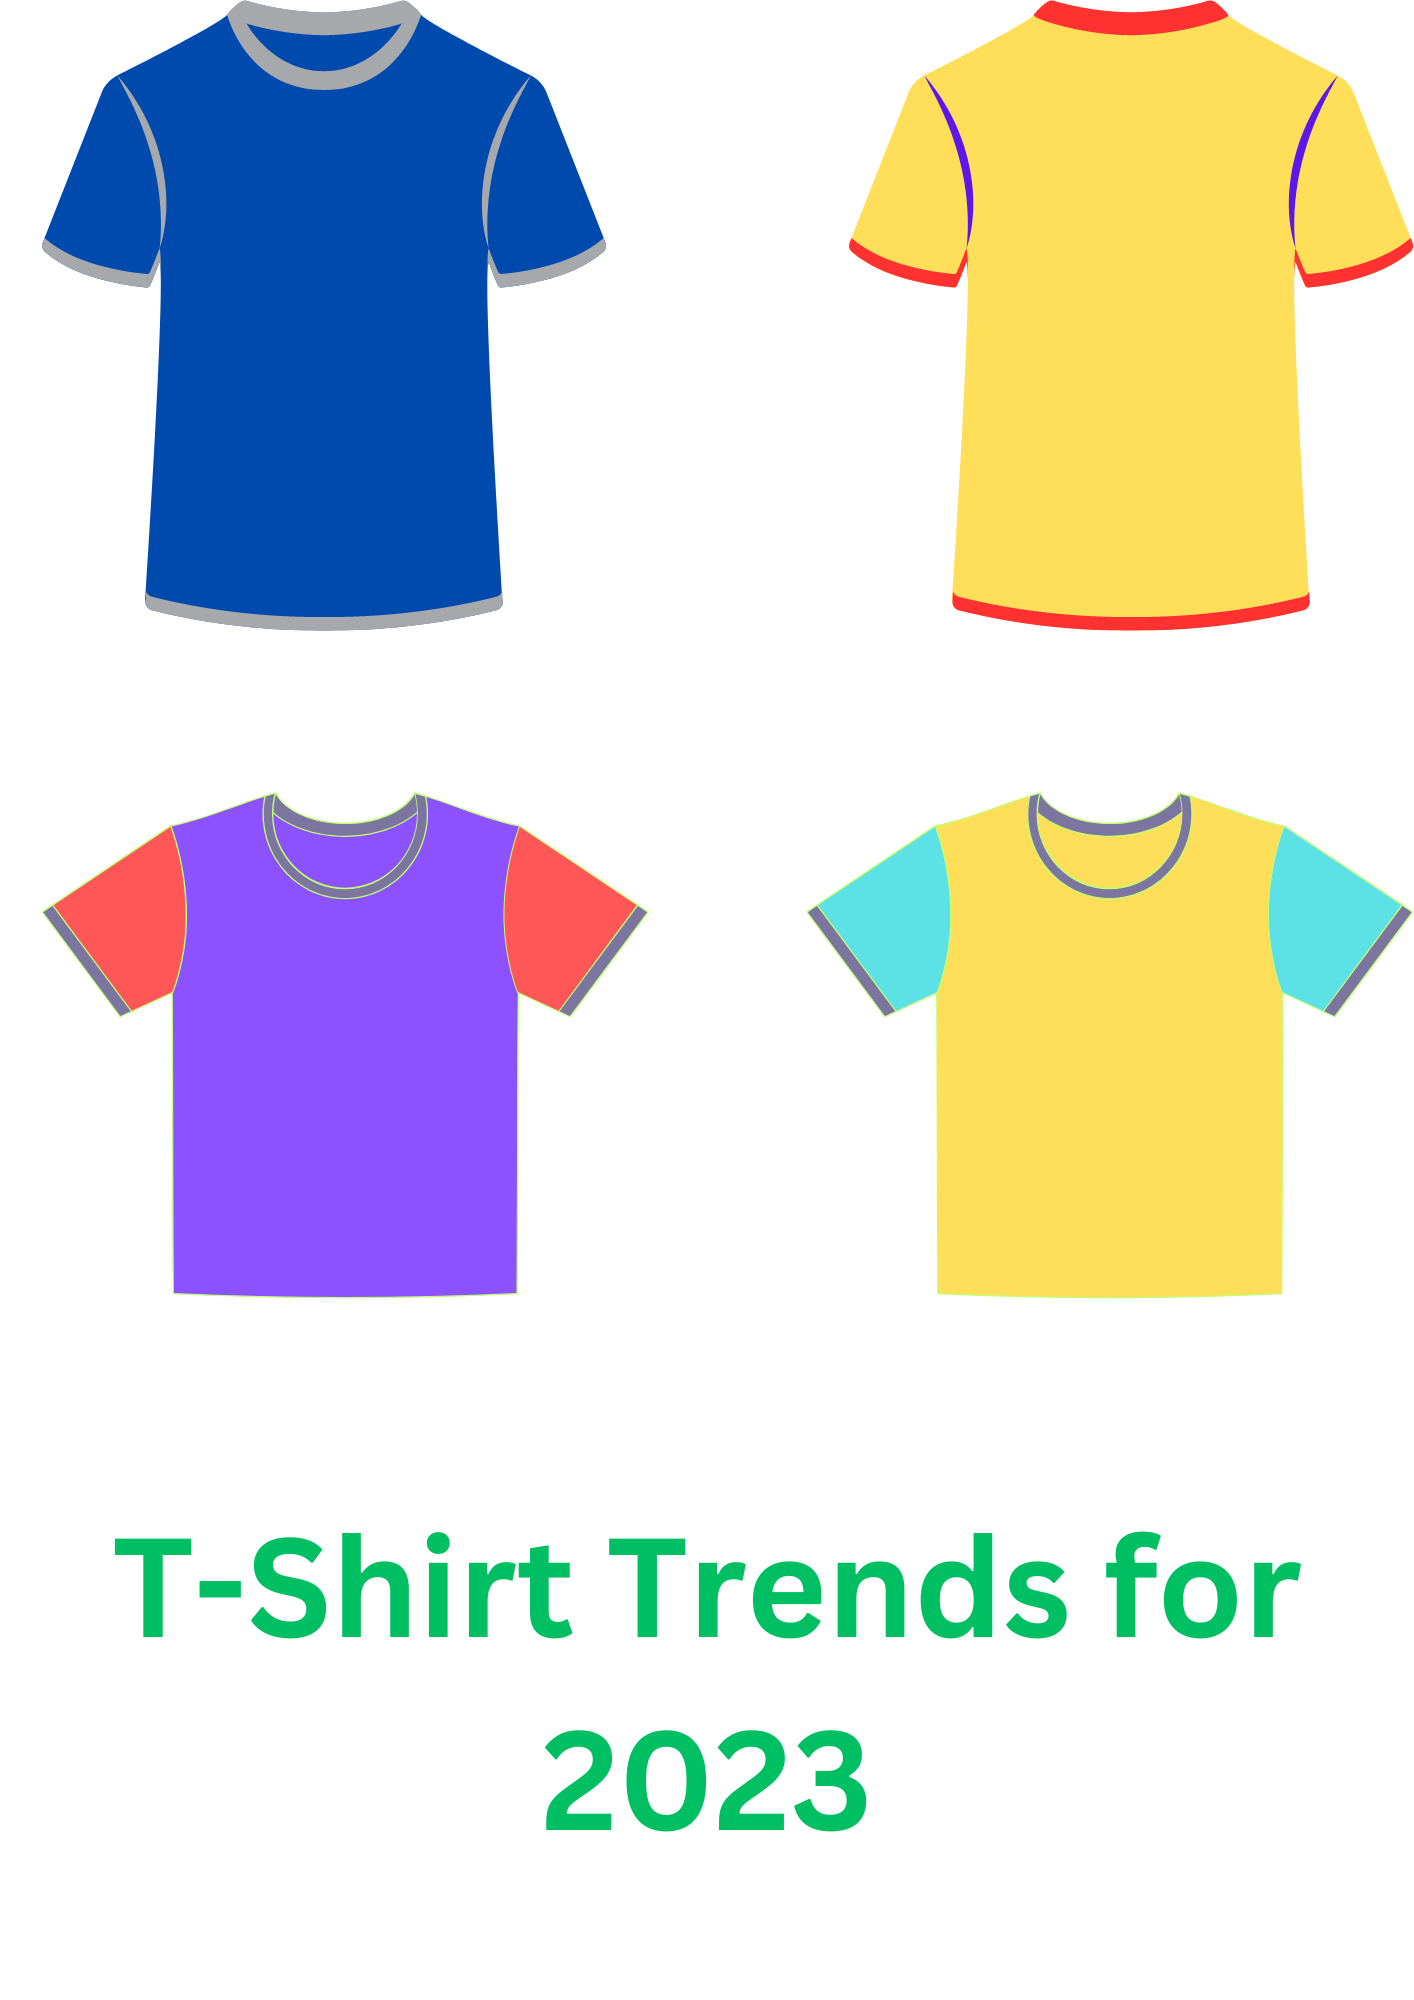 "An image highlighting the latest T-shirt trends for 2023, featuring vibrant colors, unique prints, and modern designs."